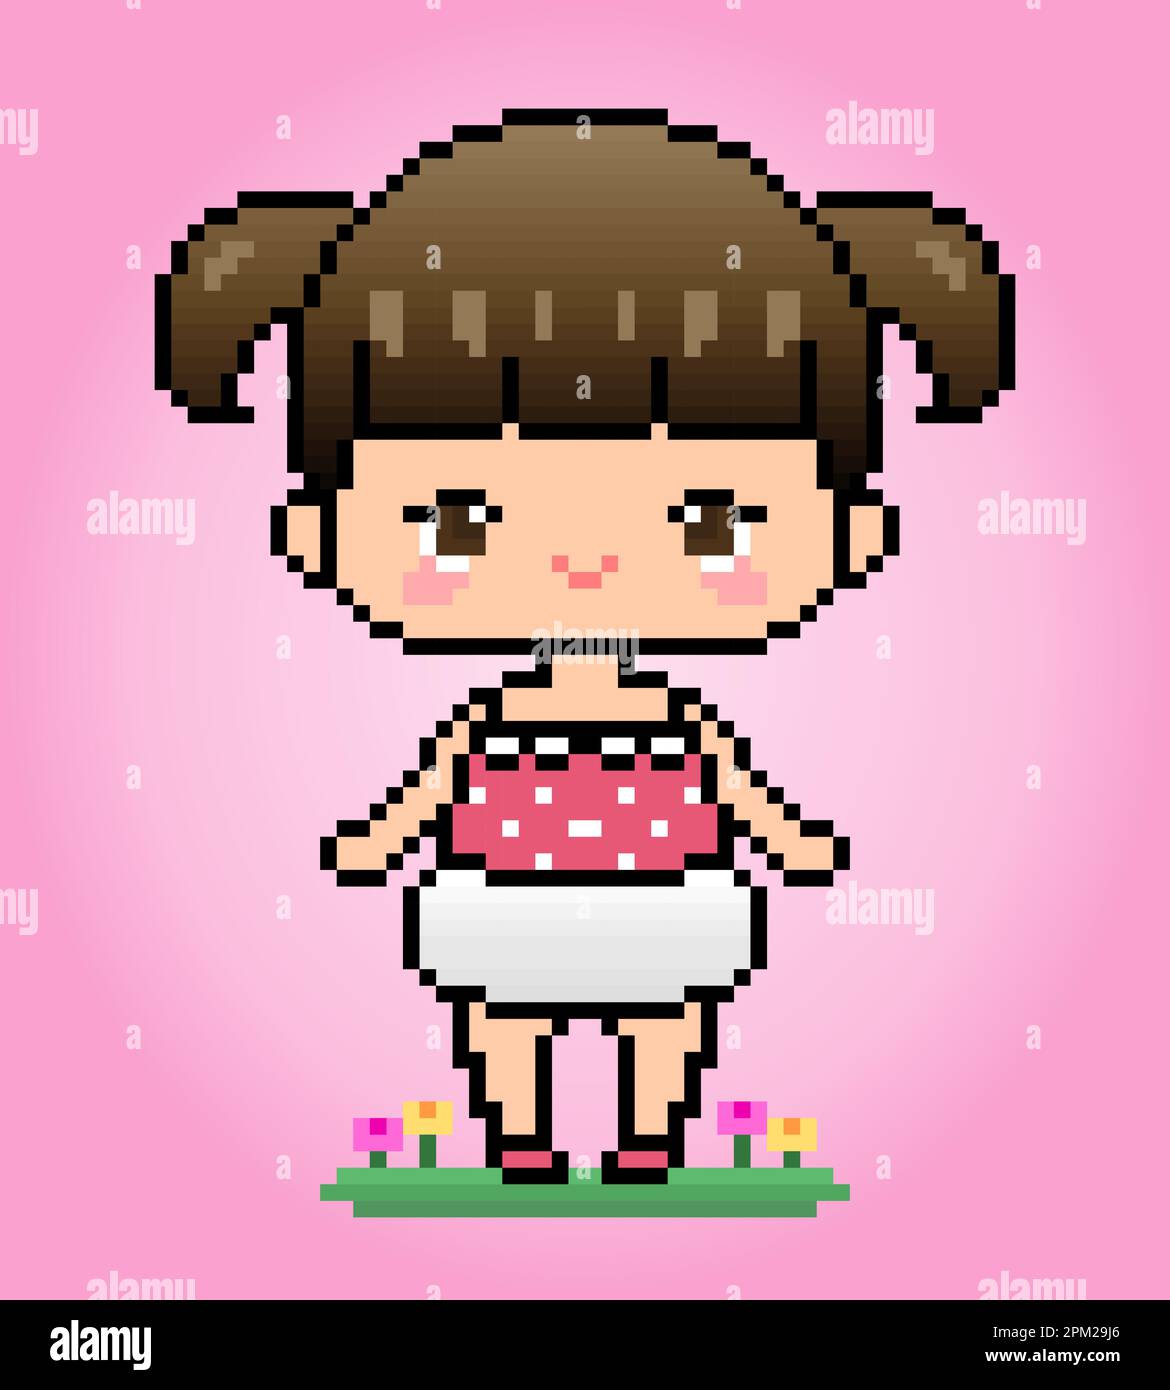 8 bit baby pixel character. Anime cartoon girl in vector illustration for game assets or cross stitch patterns. Stock Vector